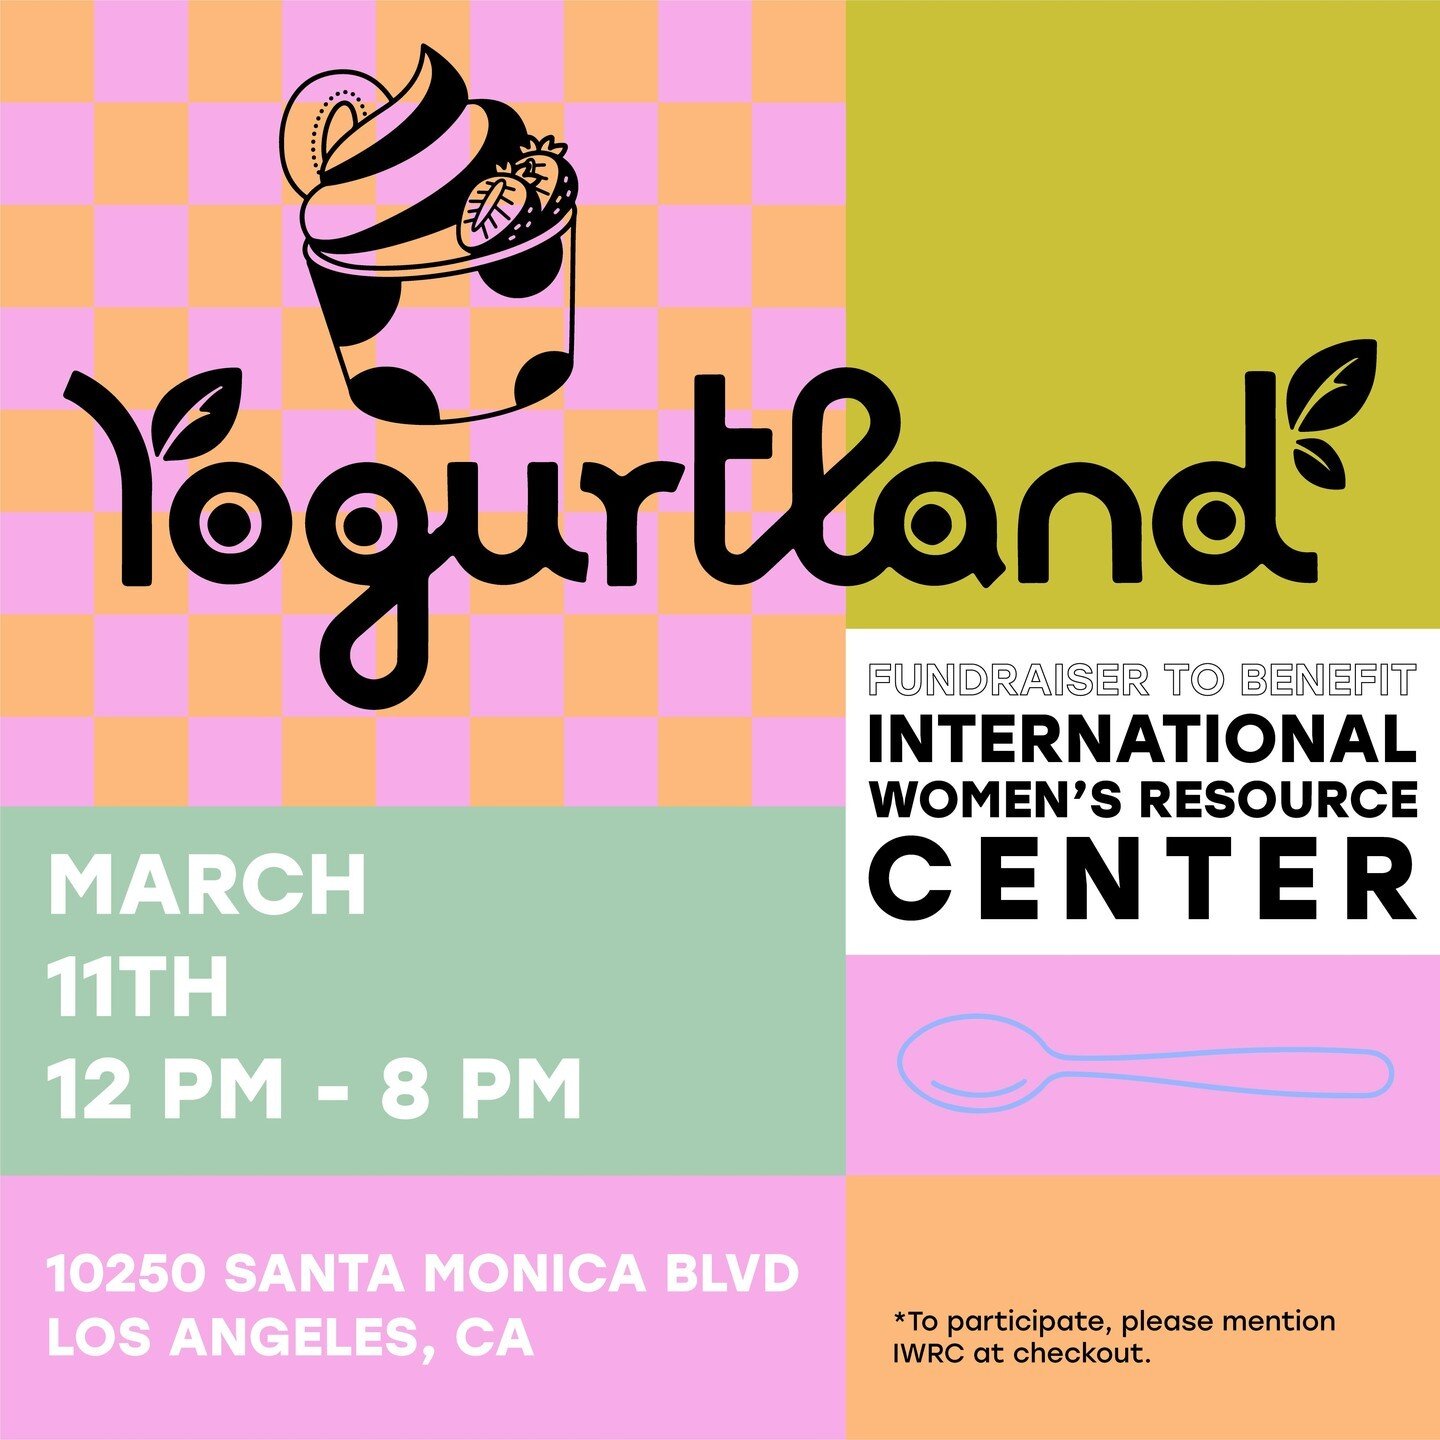 Yogurtland is hosting a fundraiser to benefit IWRC! 

Date: Monday, March 11th
Time: 12:00 PM - 8:00 PM 
Location: 10250 Santa Monica Blvd, Los Angeles, CA

You can support 💵 IWRC while enjoying a sweet treat 🍨! To participate, meet your friends an